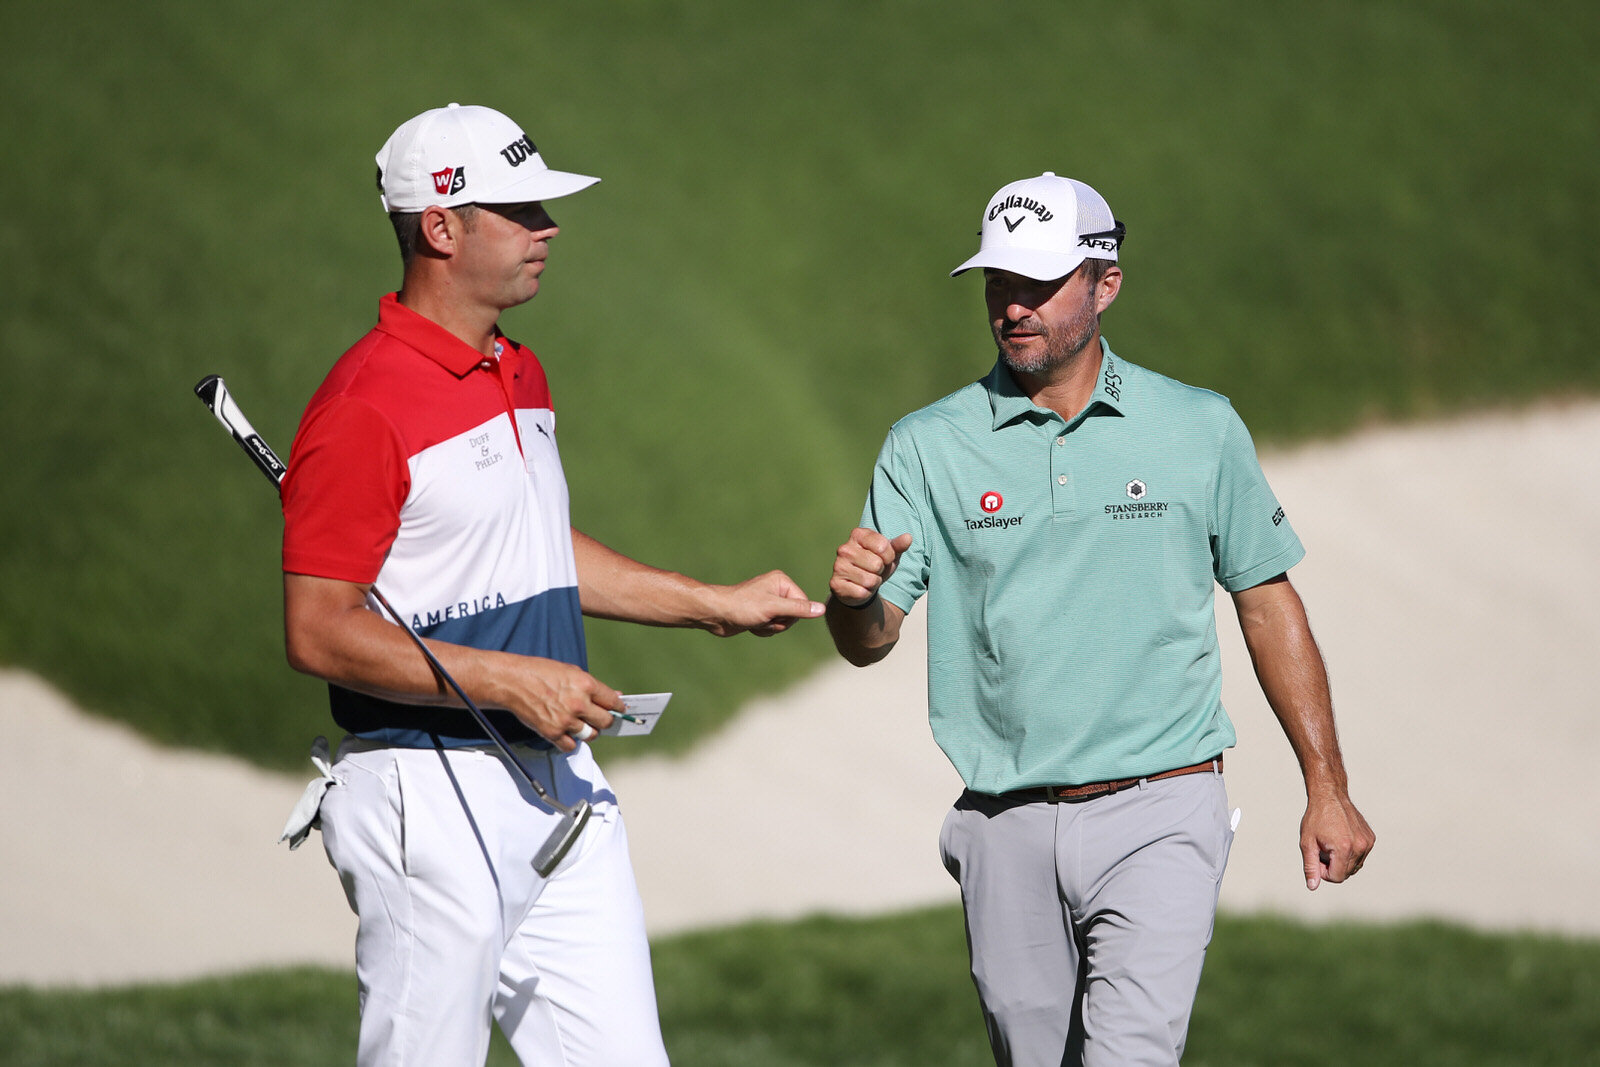  LAS VEGAS, NEVADA - OCTOBER 16: Gary Woodland of the United States and Kevin Kisner of the United States bump fists during the second round of the CJ Cup @ Shadow Creek on October 16, 2020 in Las Vegas, Nevada. (Photo by Christian Petersen/Getty Ima